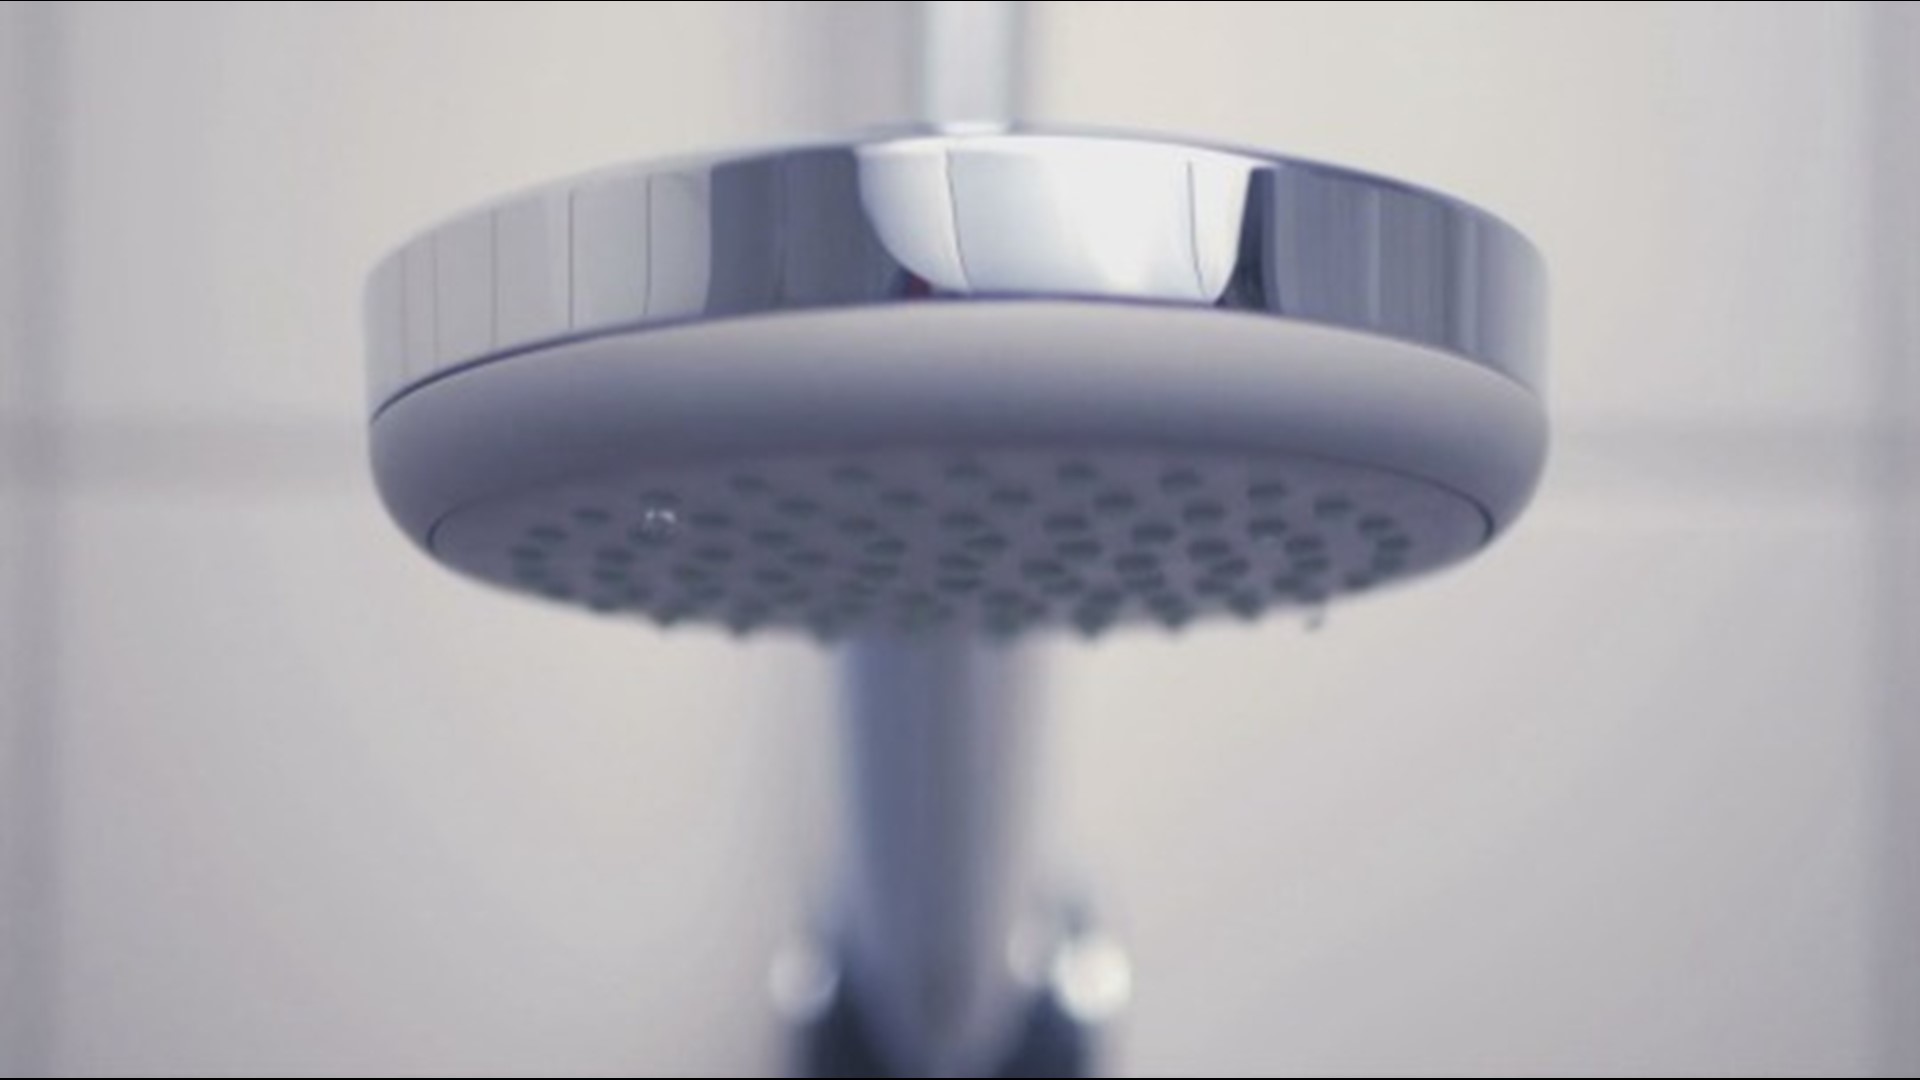 You're Likely Showering Wrong, Here's How According to Experts. Buzz60's Elitsa Bizios has the full story.